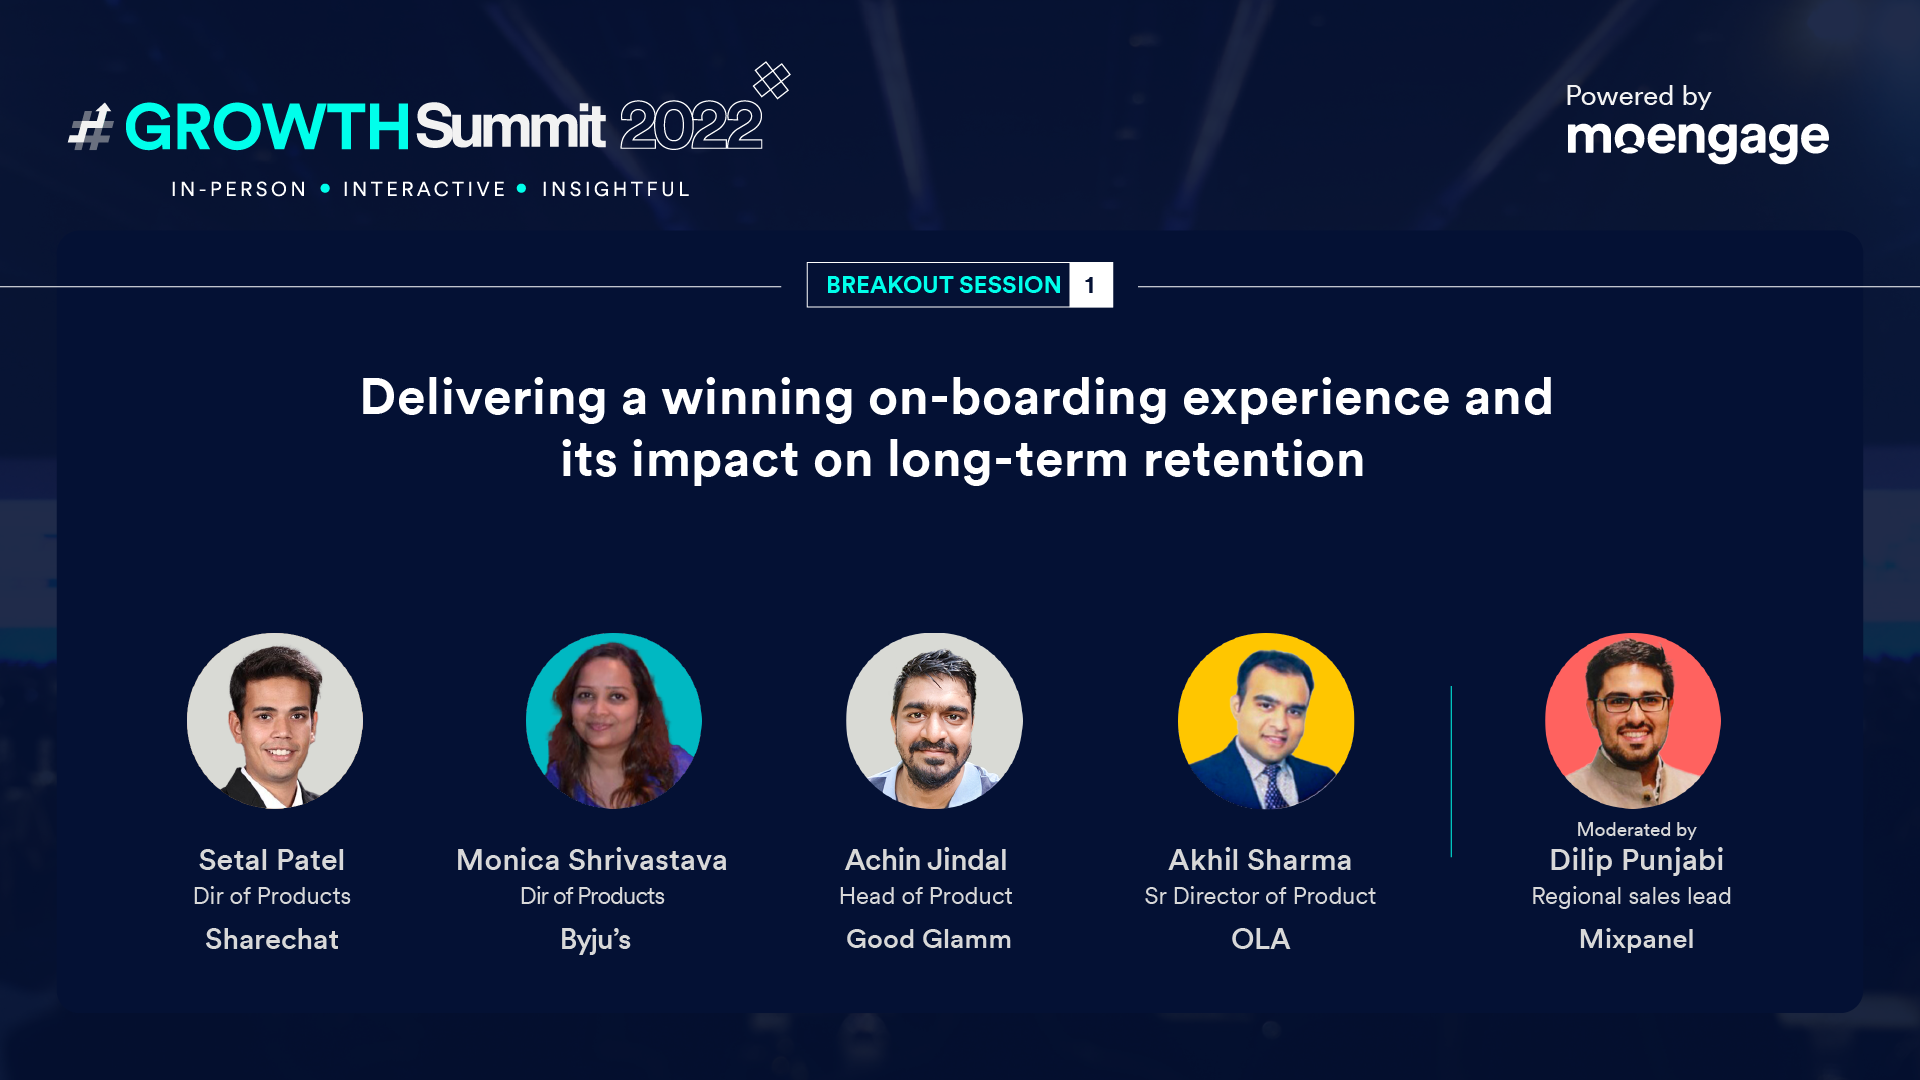 On-Boarding Experiences and its Impact on Long-Term Retention